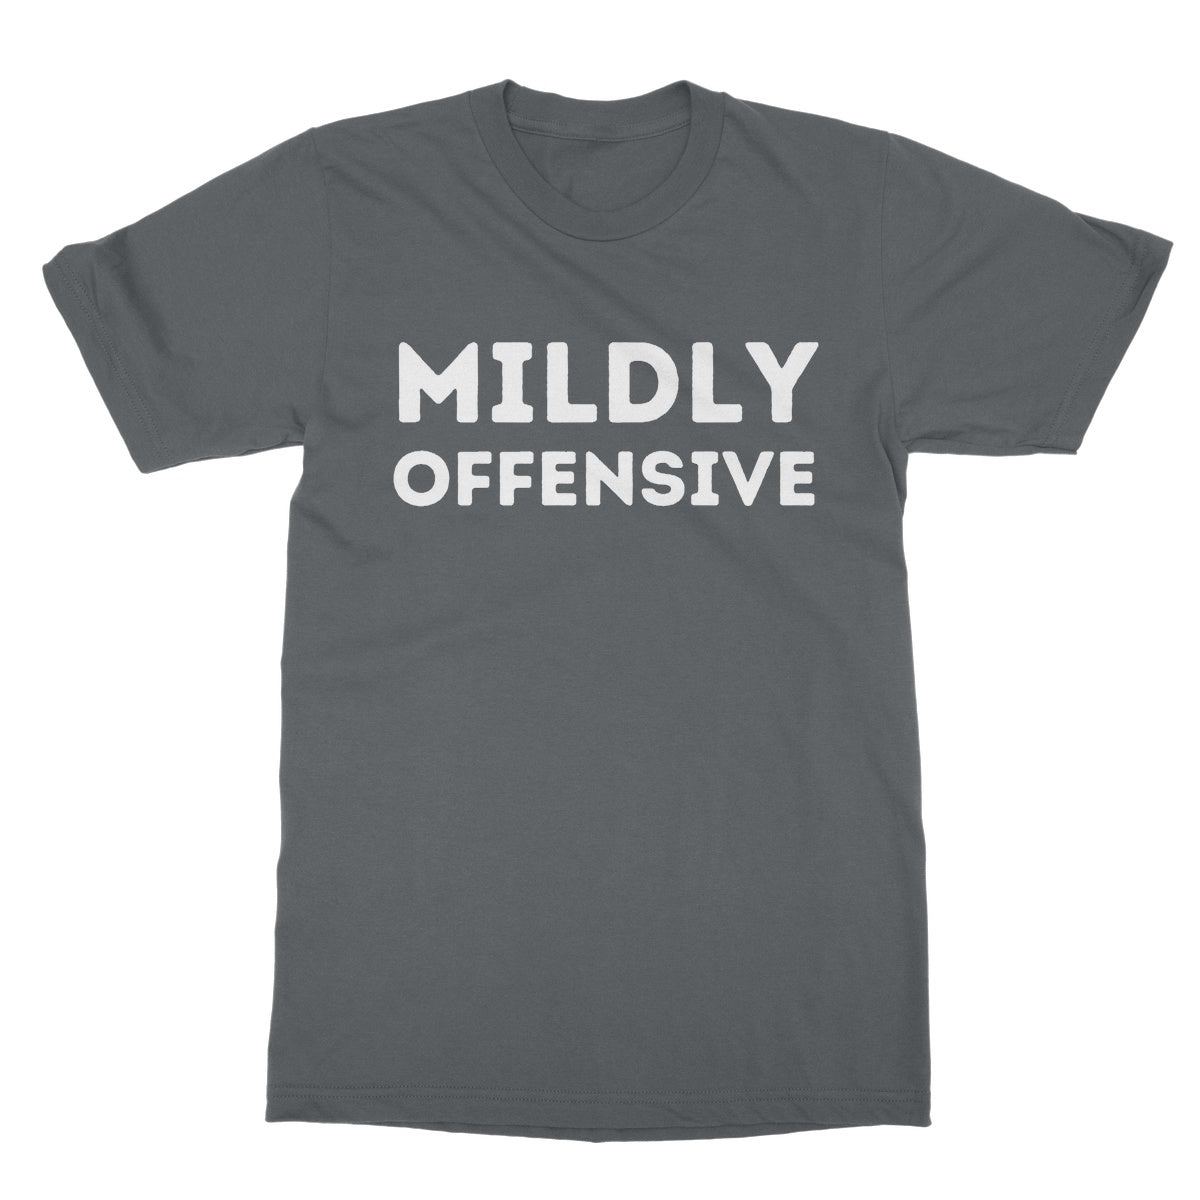 mildly offensive t shirt grey